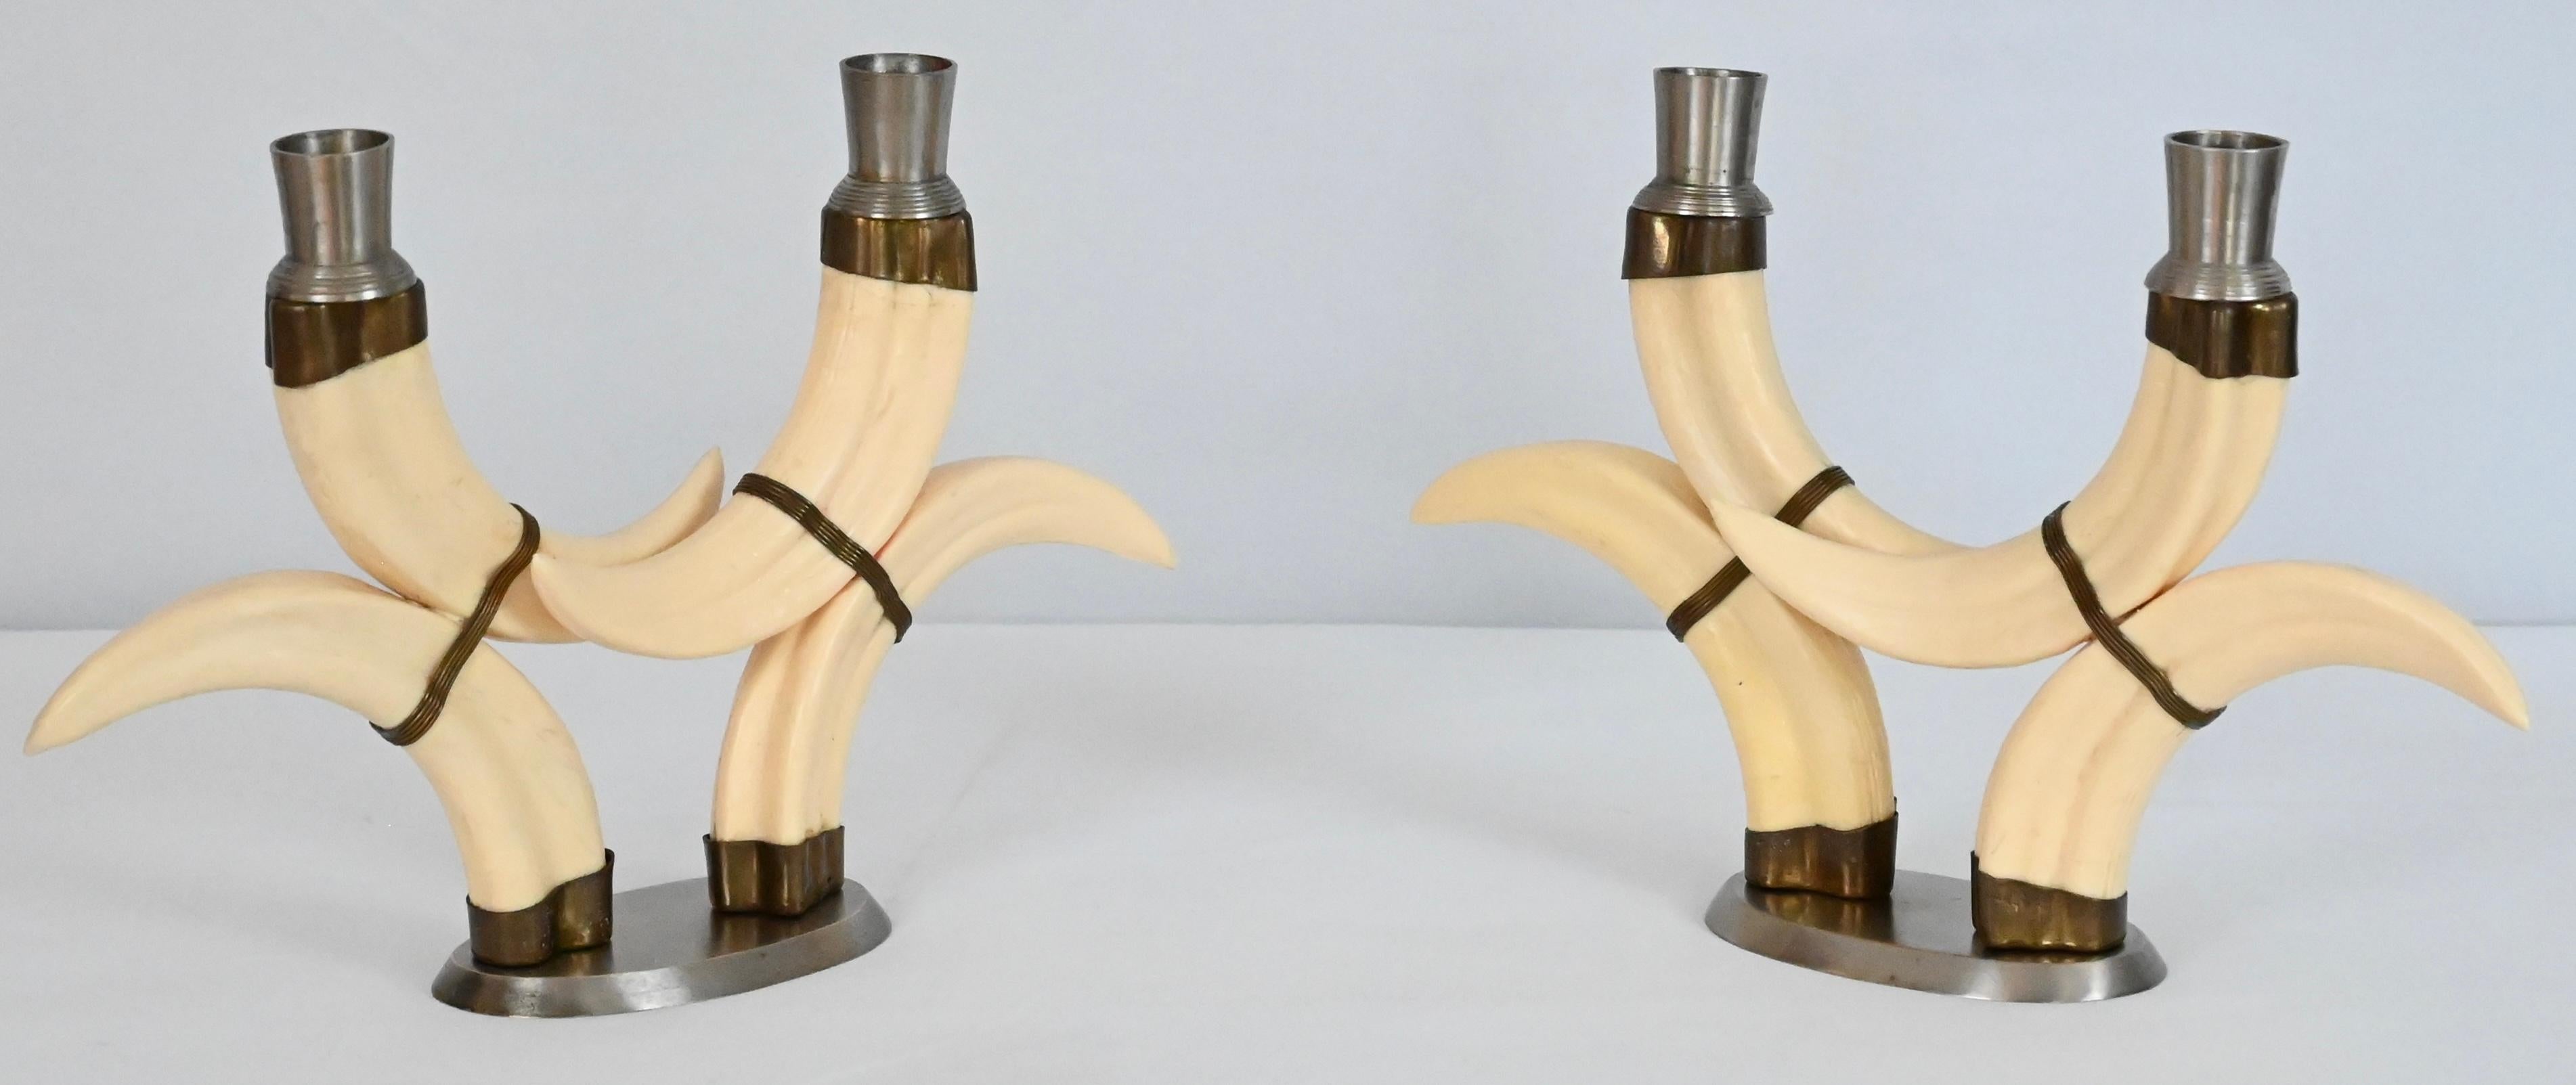 Pair of Beige Faux Horn Candlesticks Mounted in Nickel For Sale 2